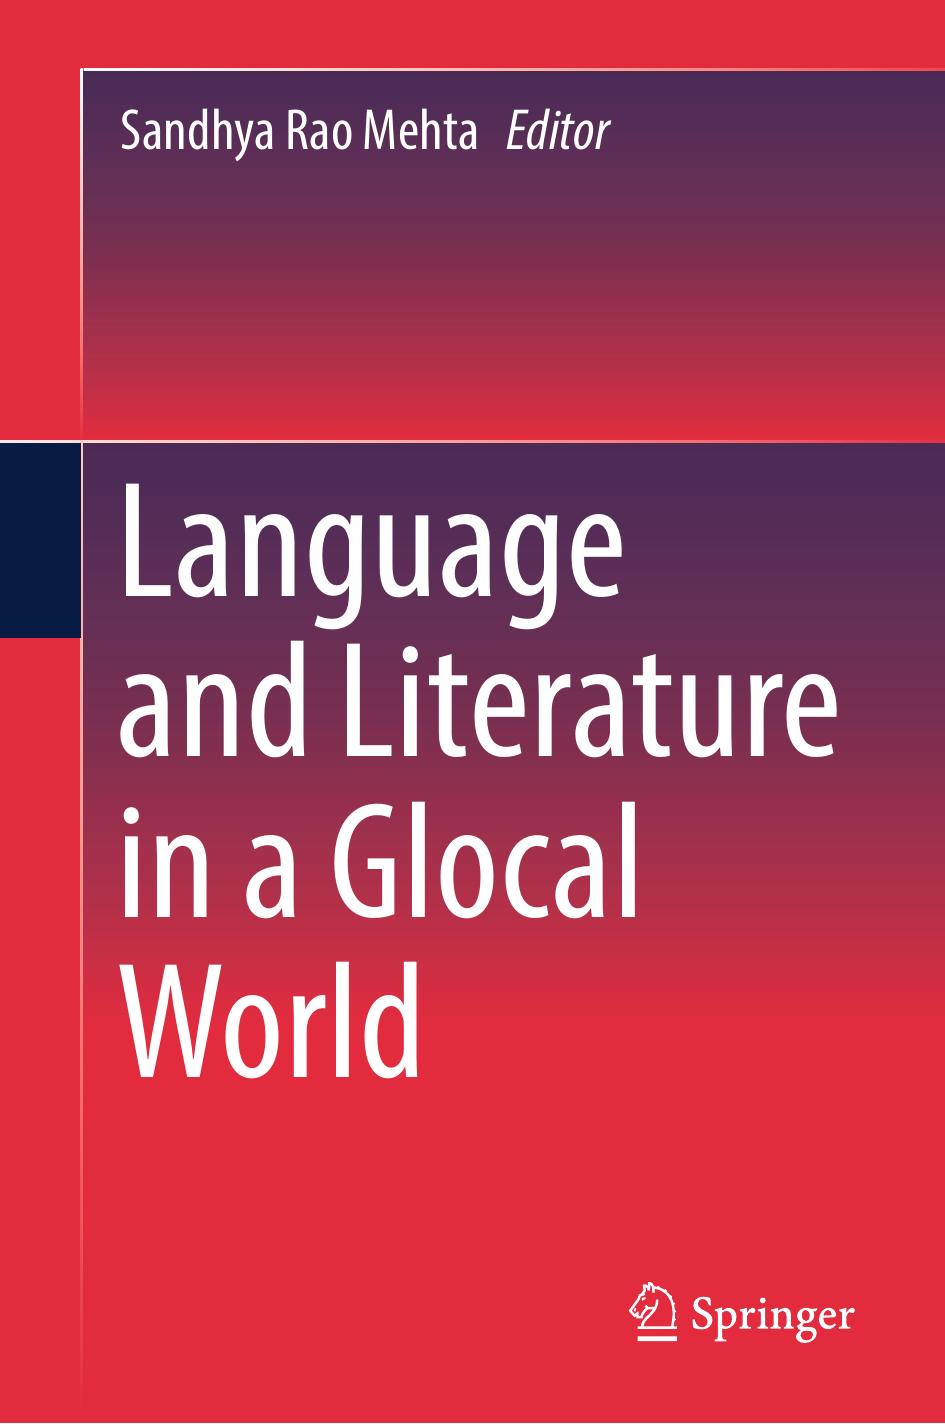 Language and Literature in a Glocal World by Sandhya Rao Mehta